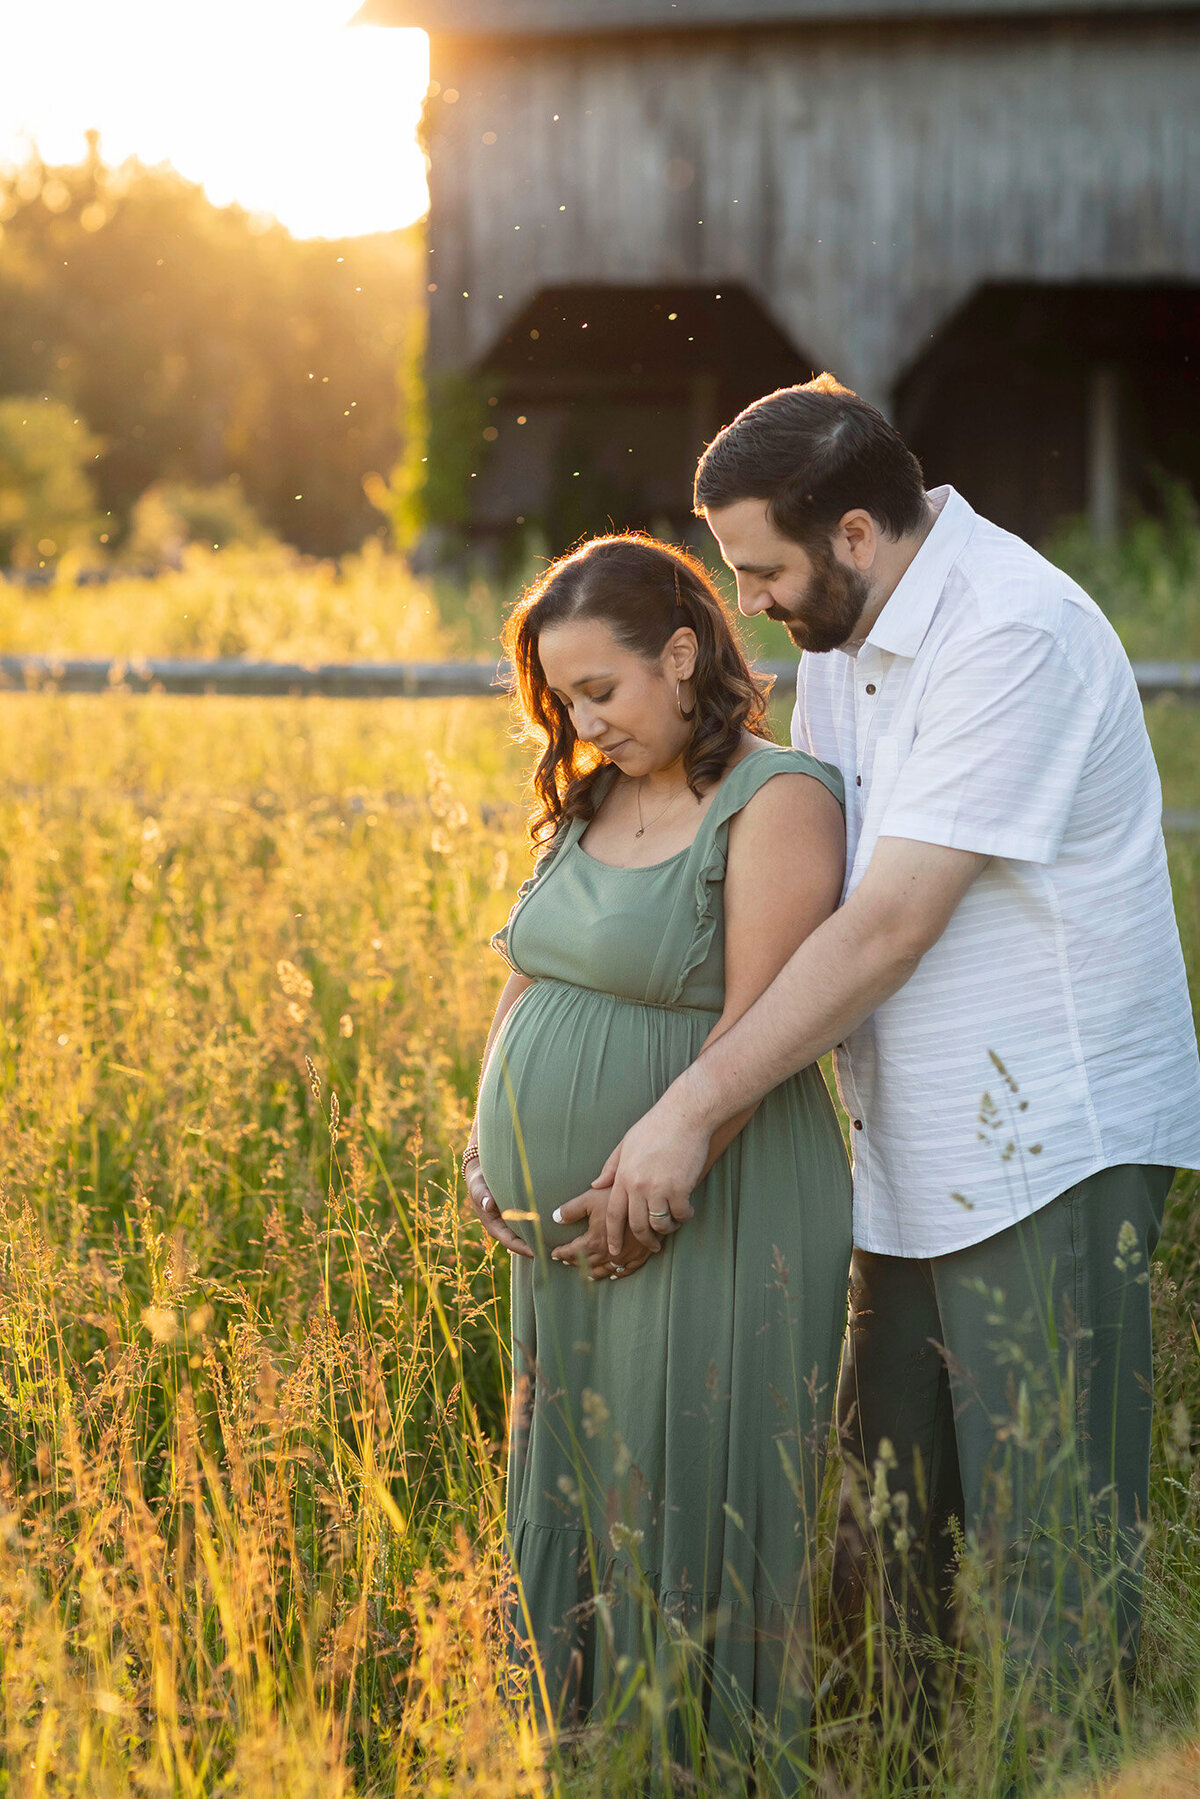 NJ Maternity photographer captures mom and dad gazing at belly